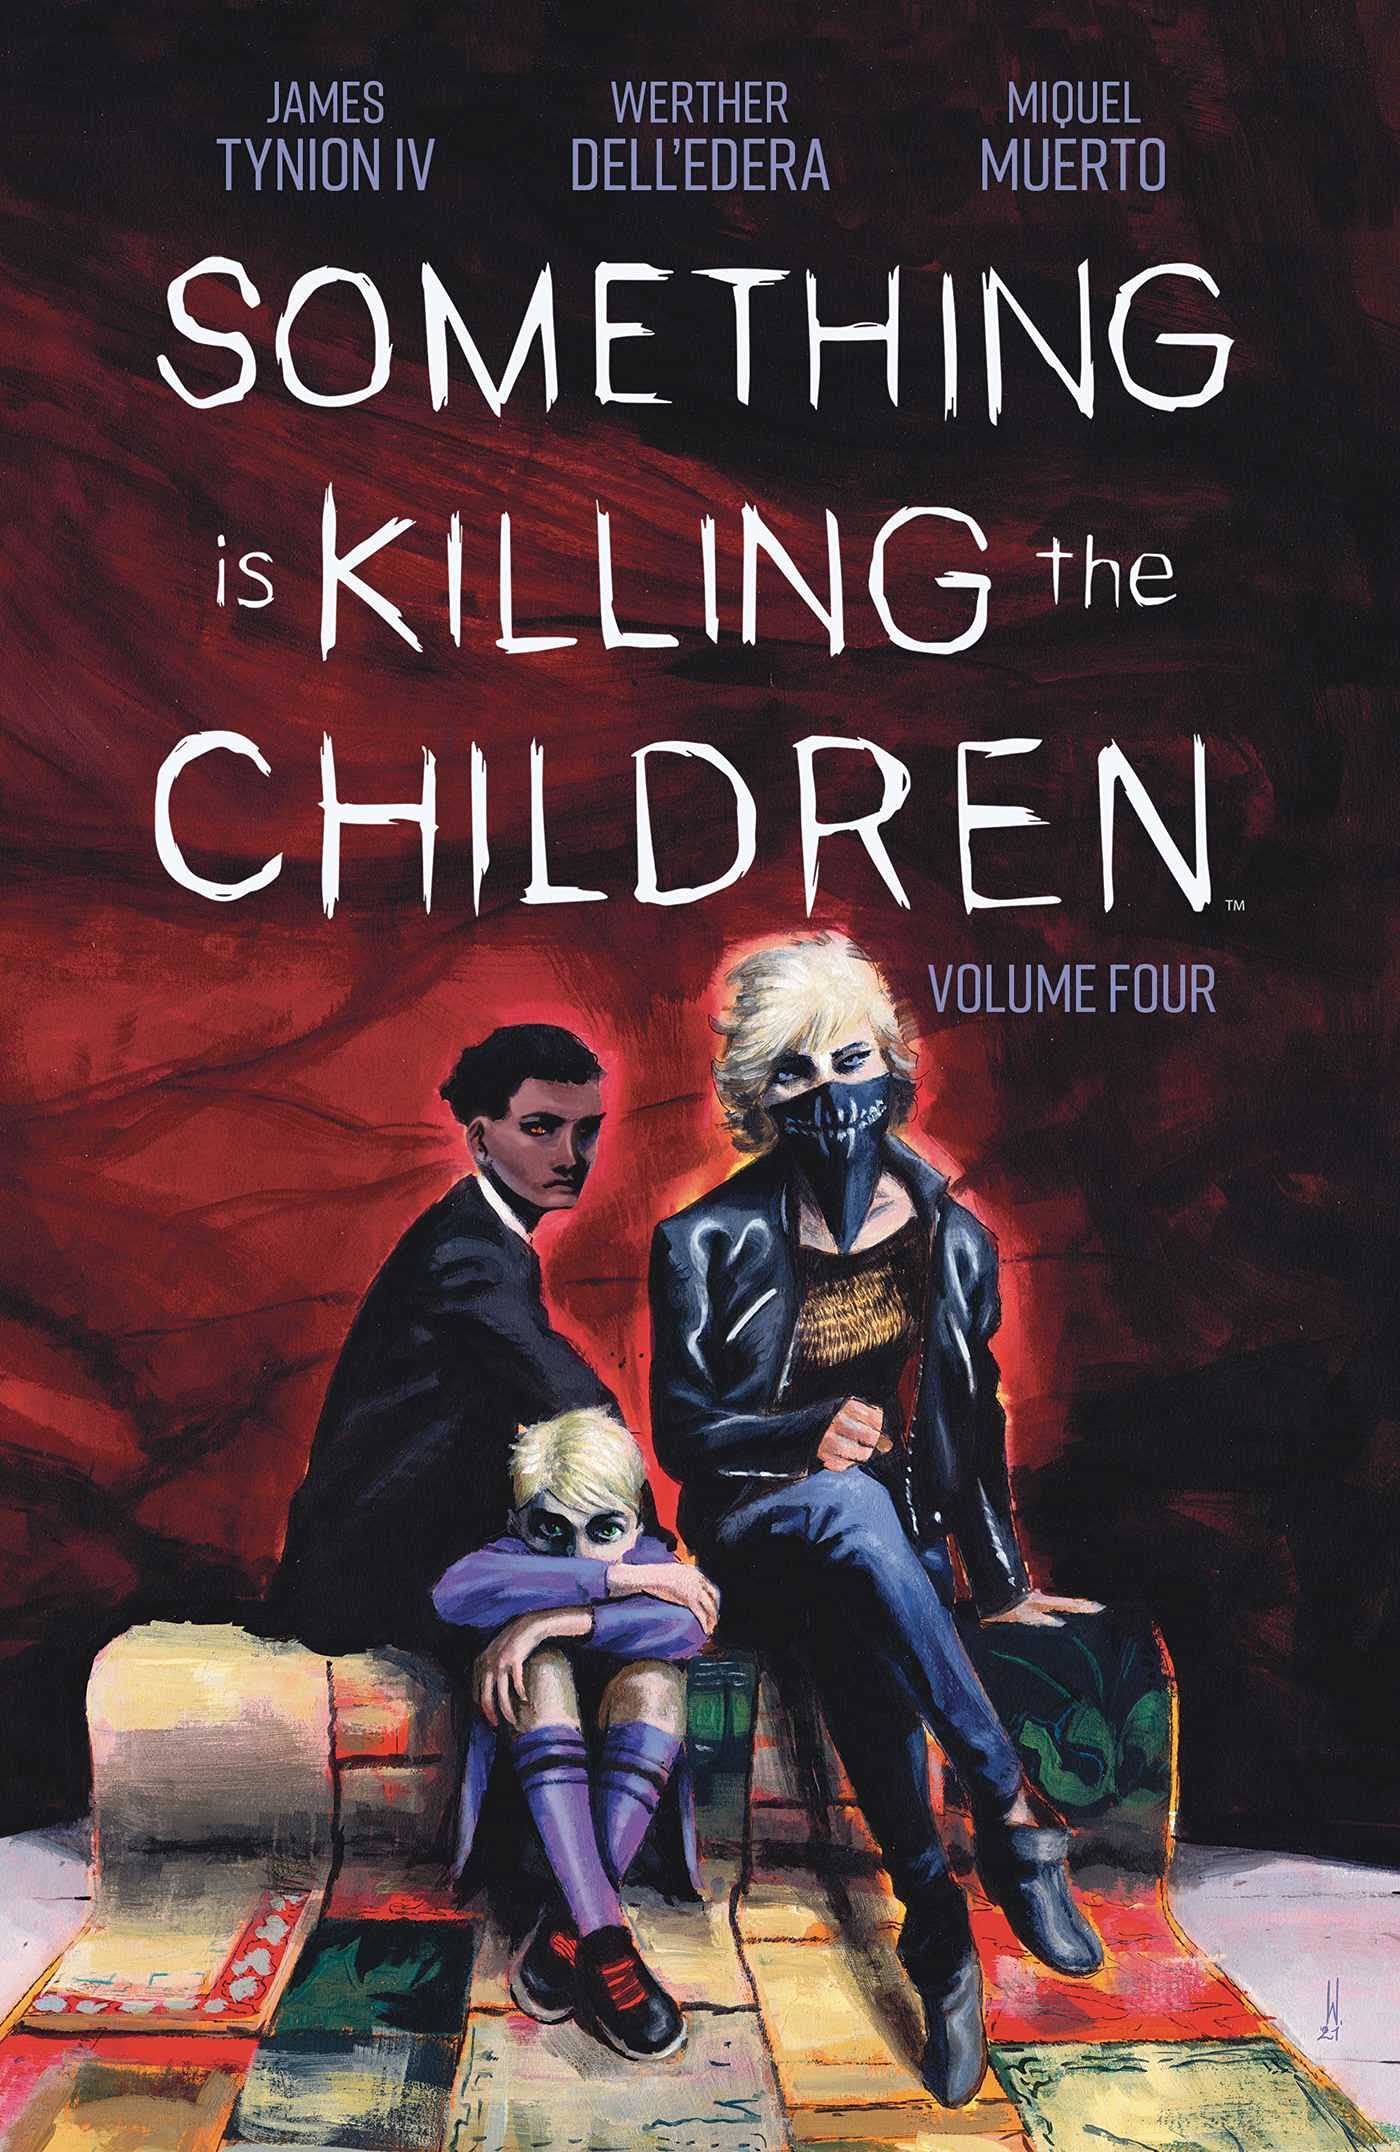 Something is Killing the Children Vol. 4 by JAMES TYNION IV